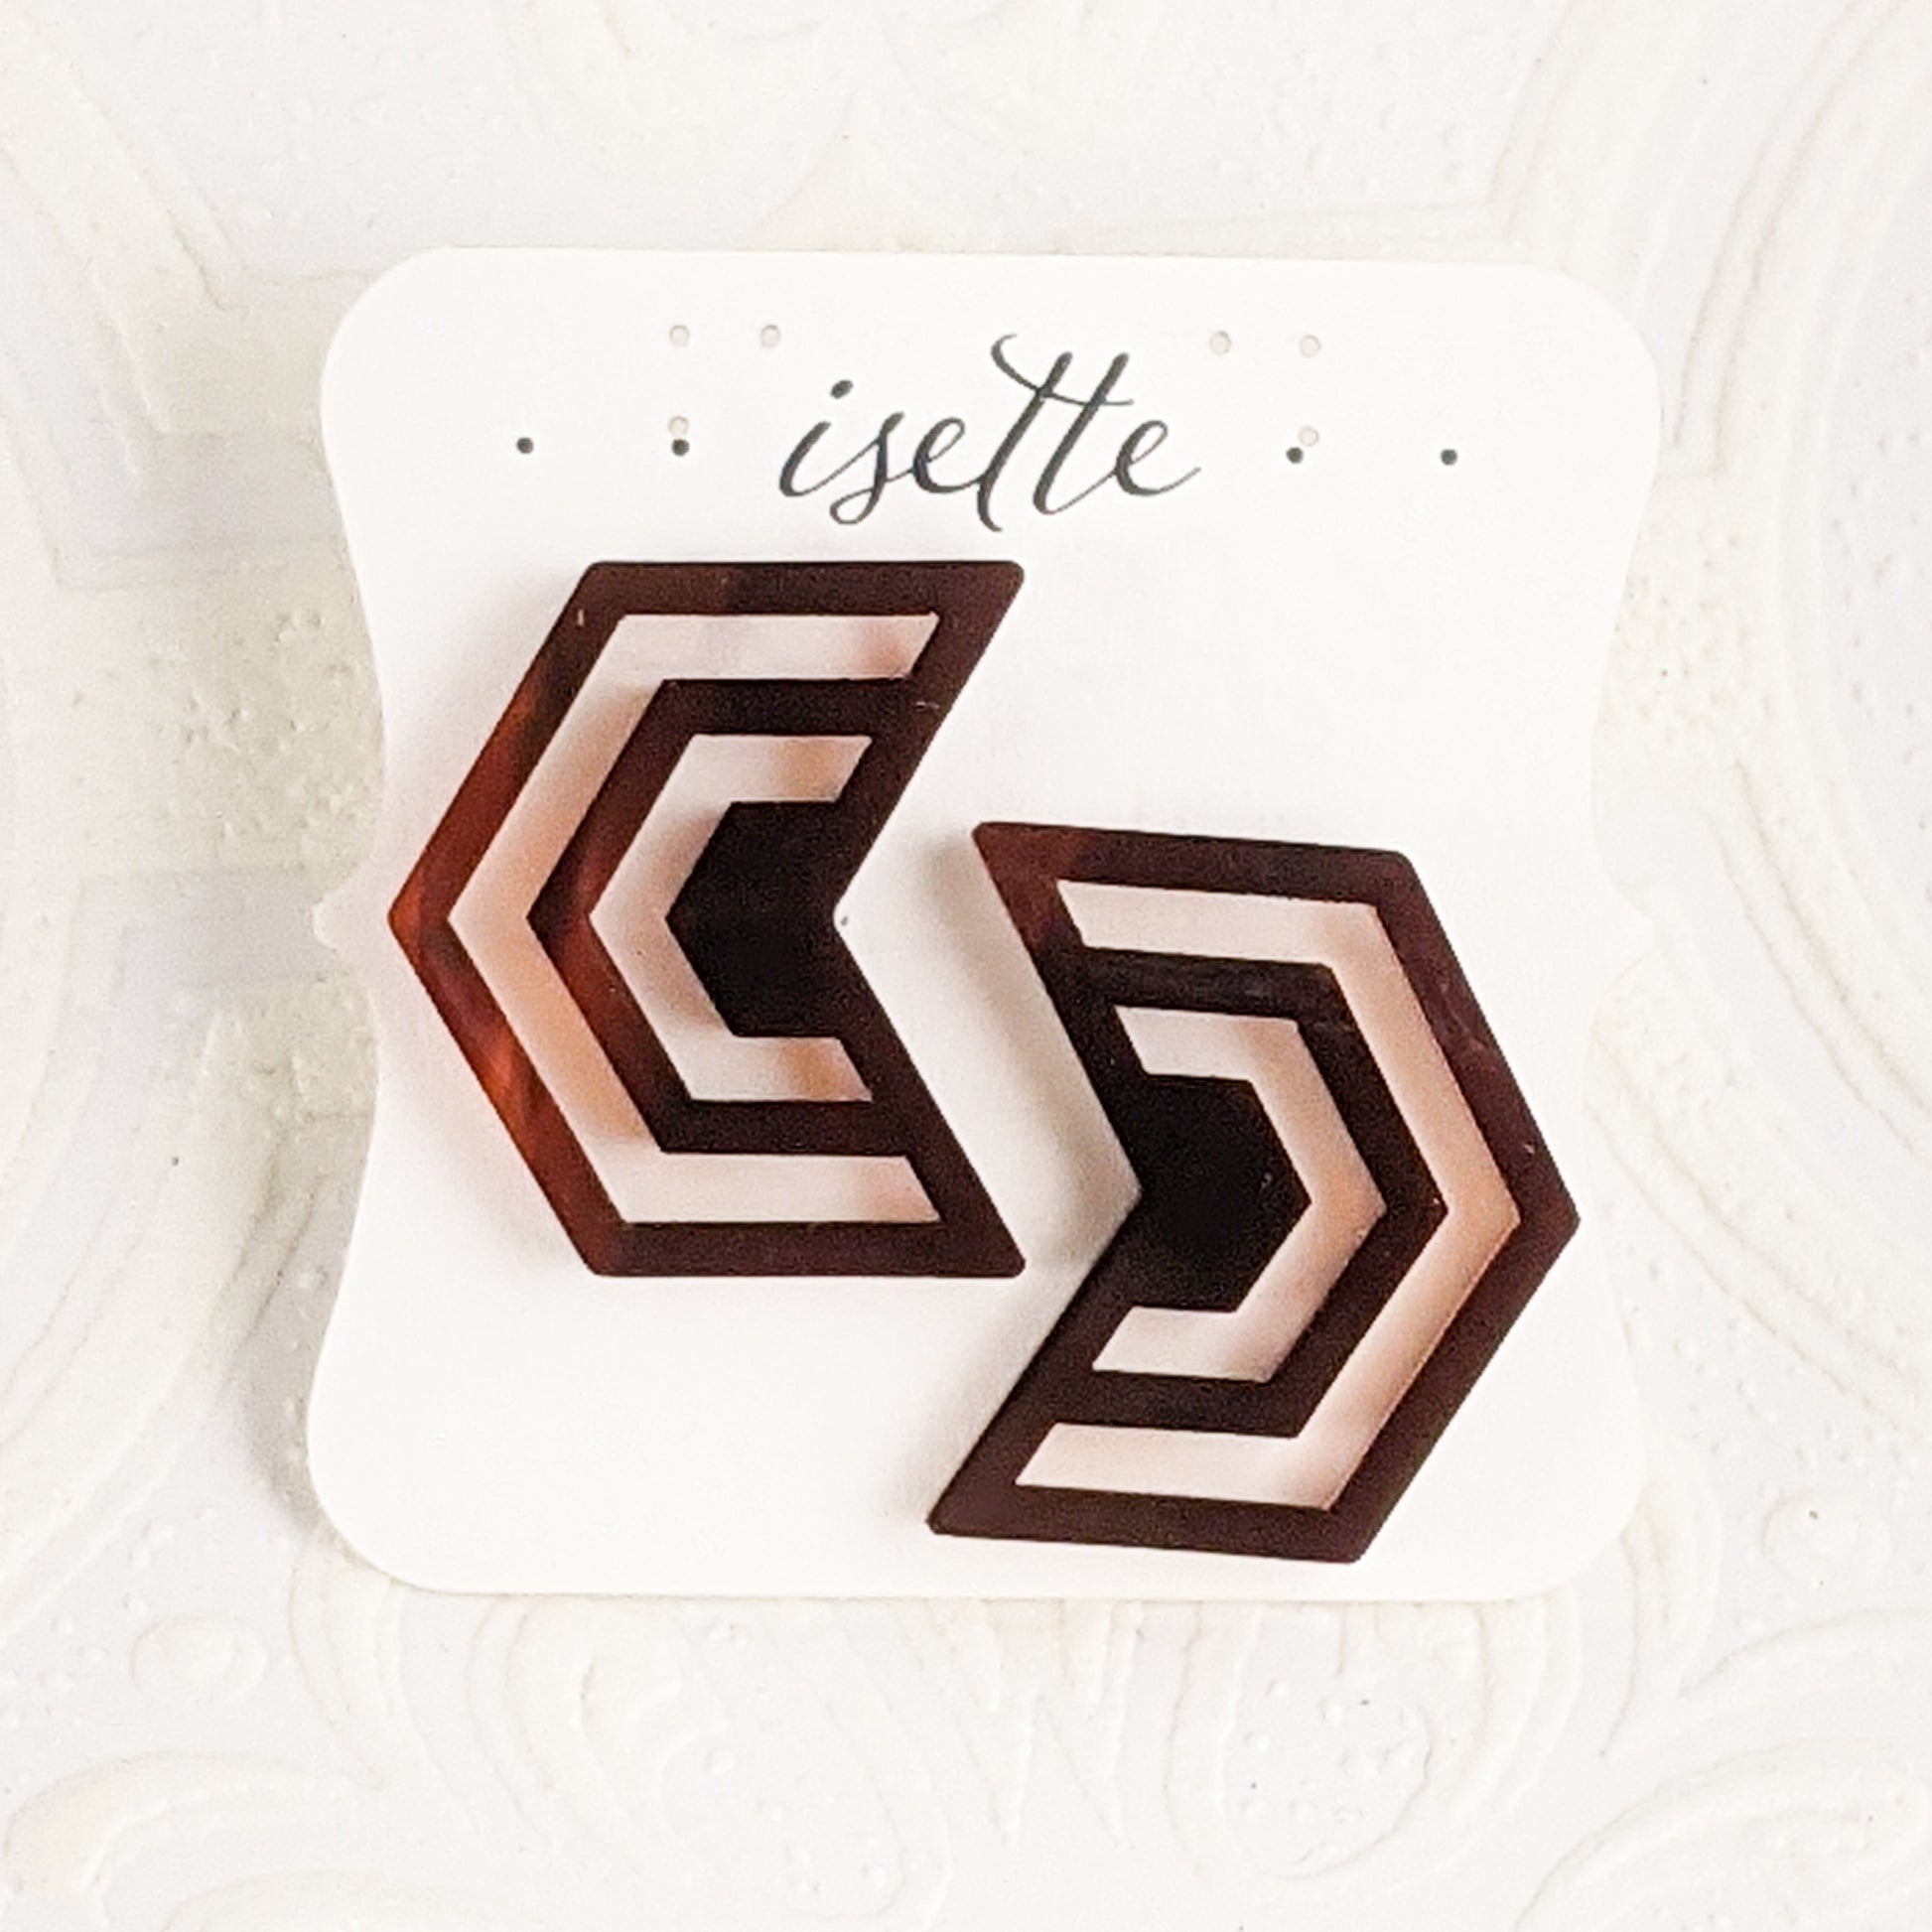 Warm translucent brown and gold tortoiseshell acrylic cut into Irregular Radiating Hexagon Earrings on earring card by Isette